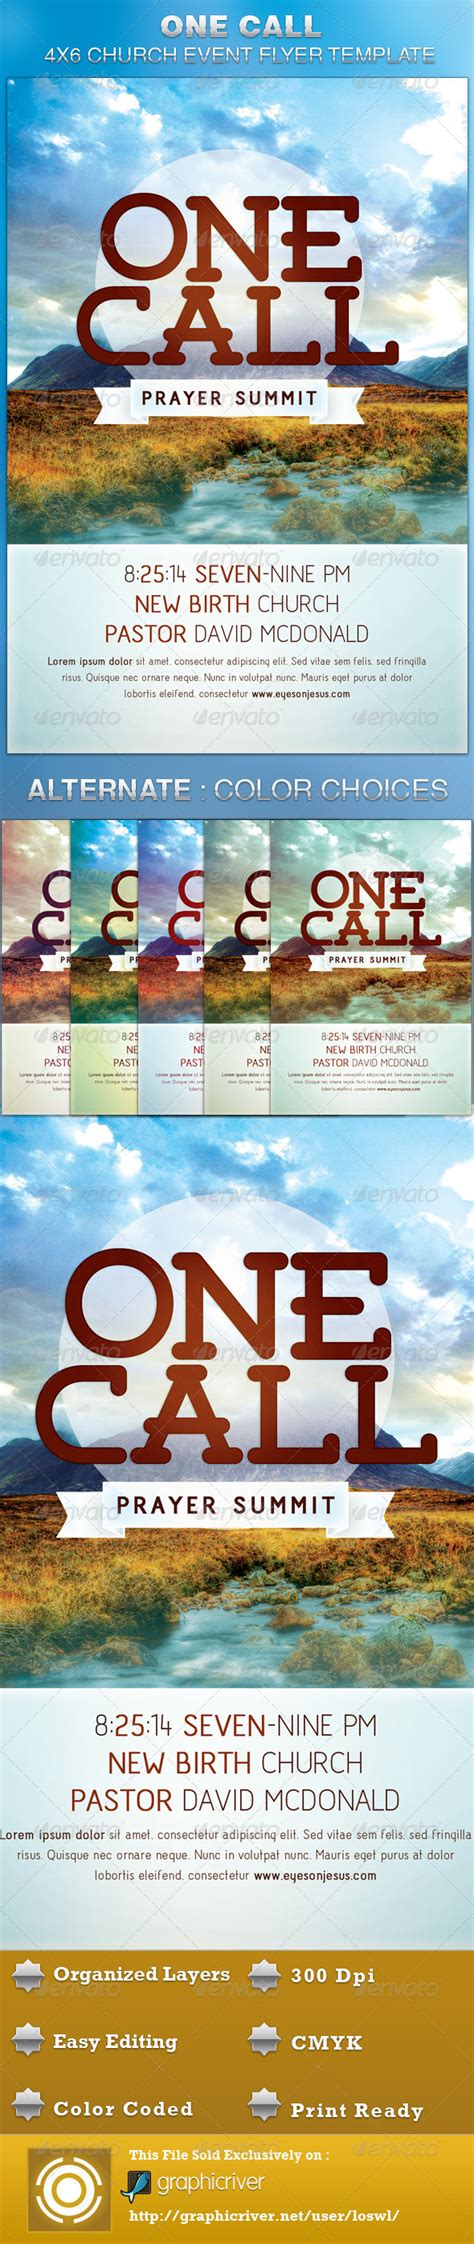 One Call Church Flyer Template By Loswl Graphicriver